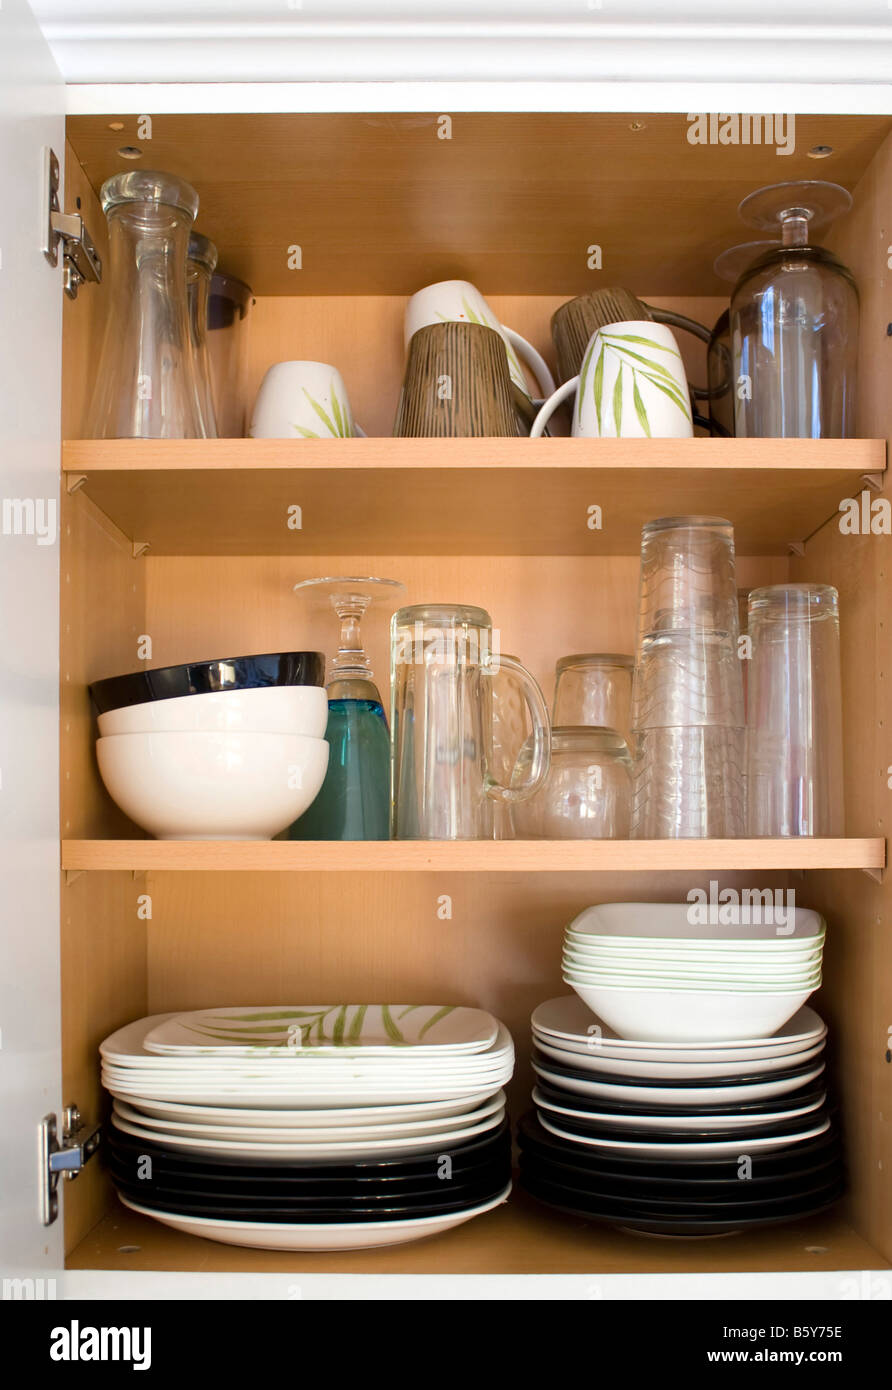 A full cabinet full of dishes and plates Stock Photo